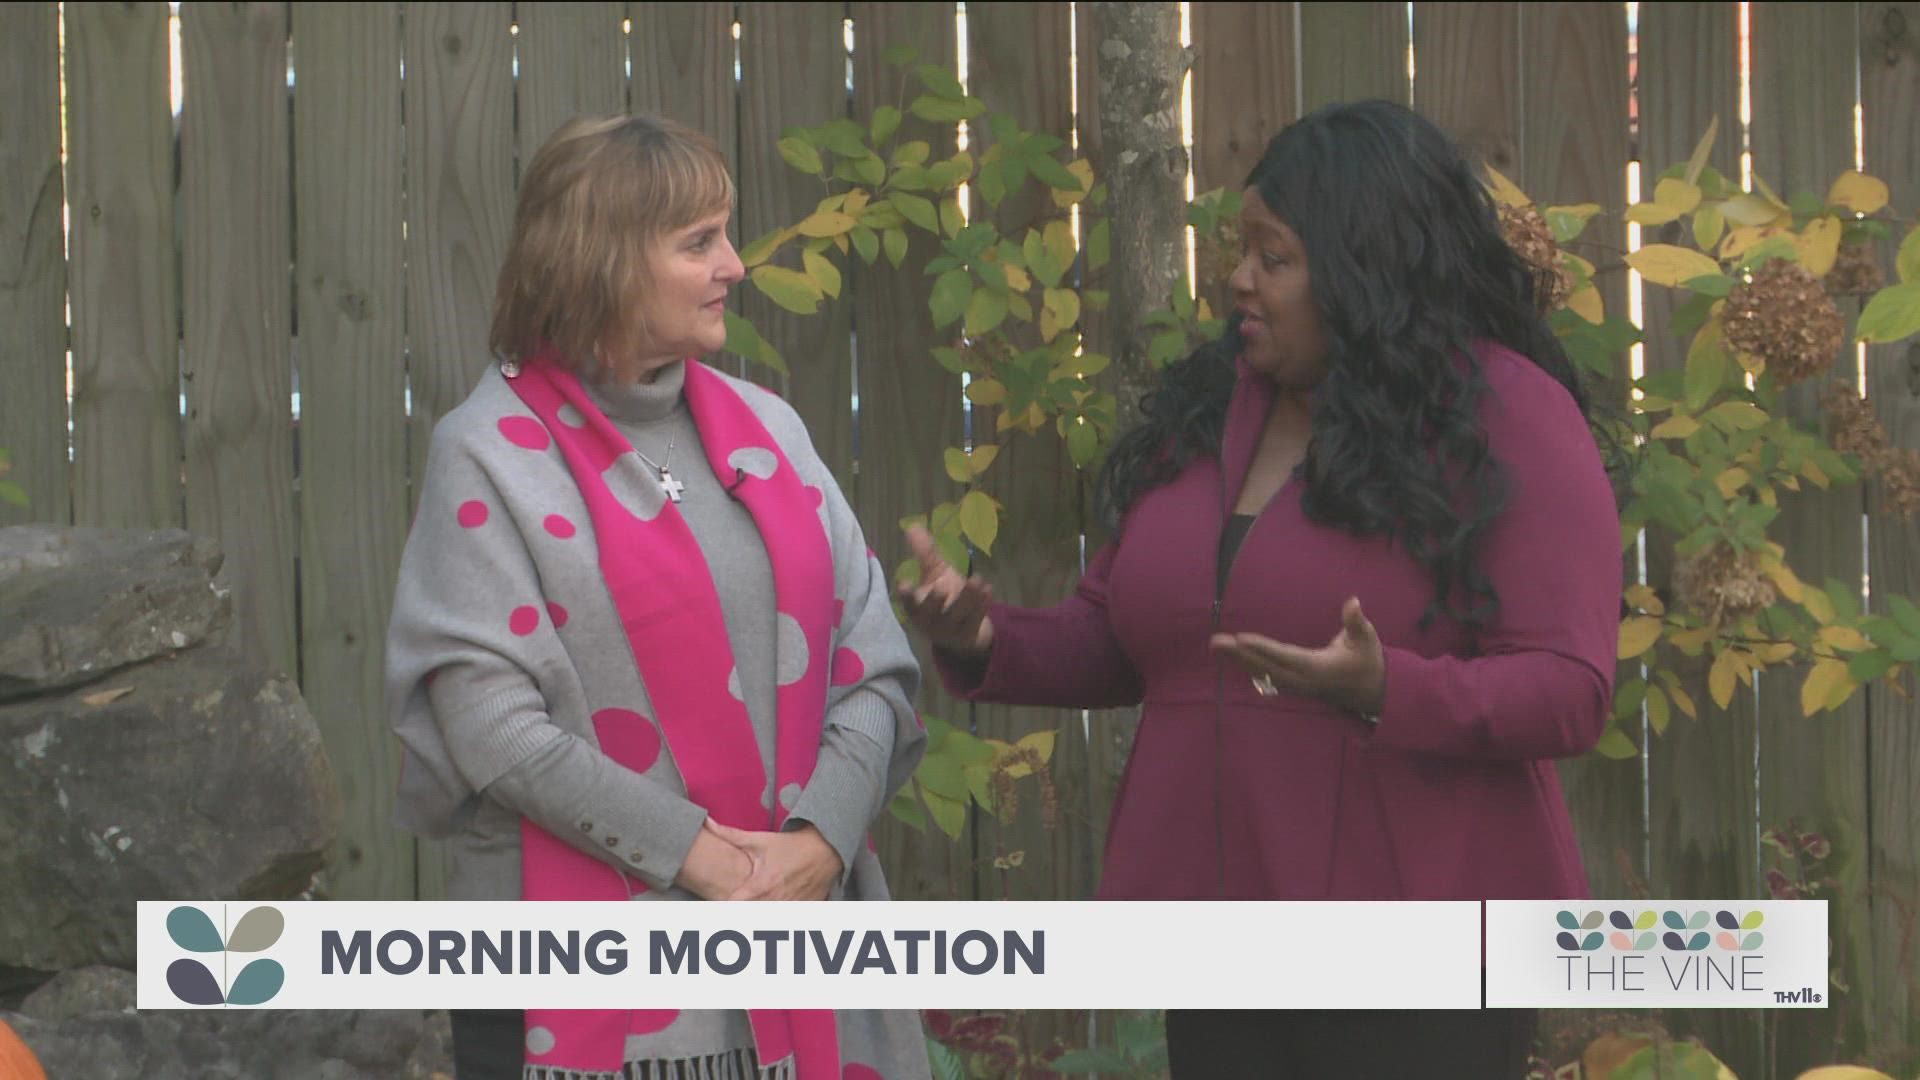 Life coach Deana Williams reminds us to take time and give thanks for what matters in our lives.